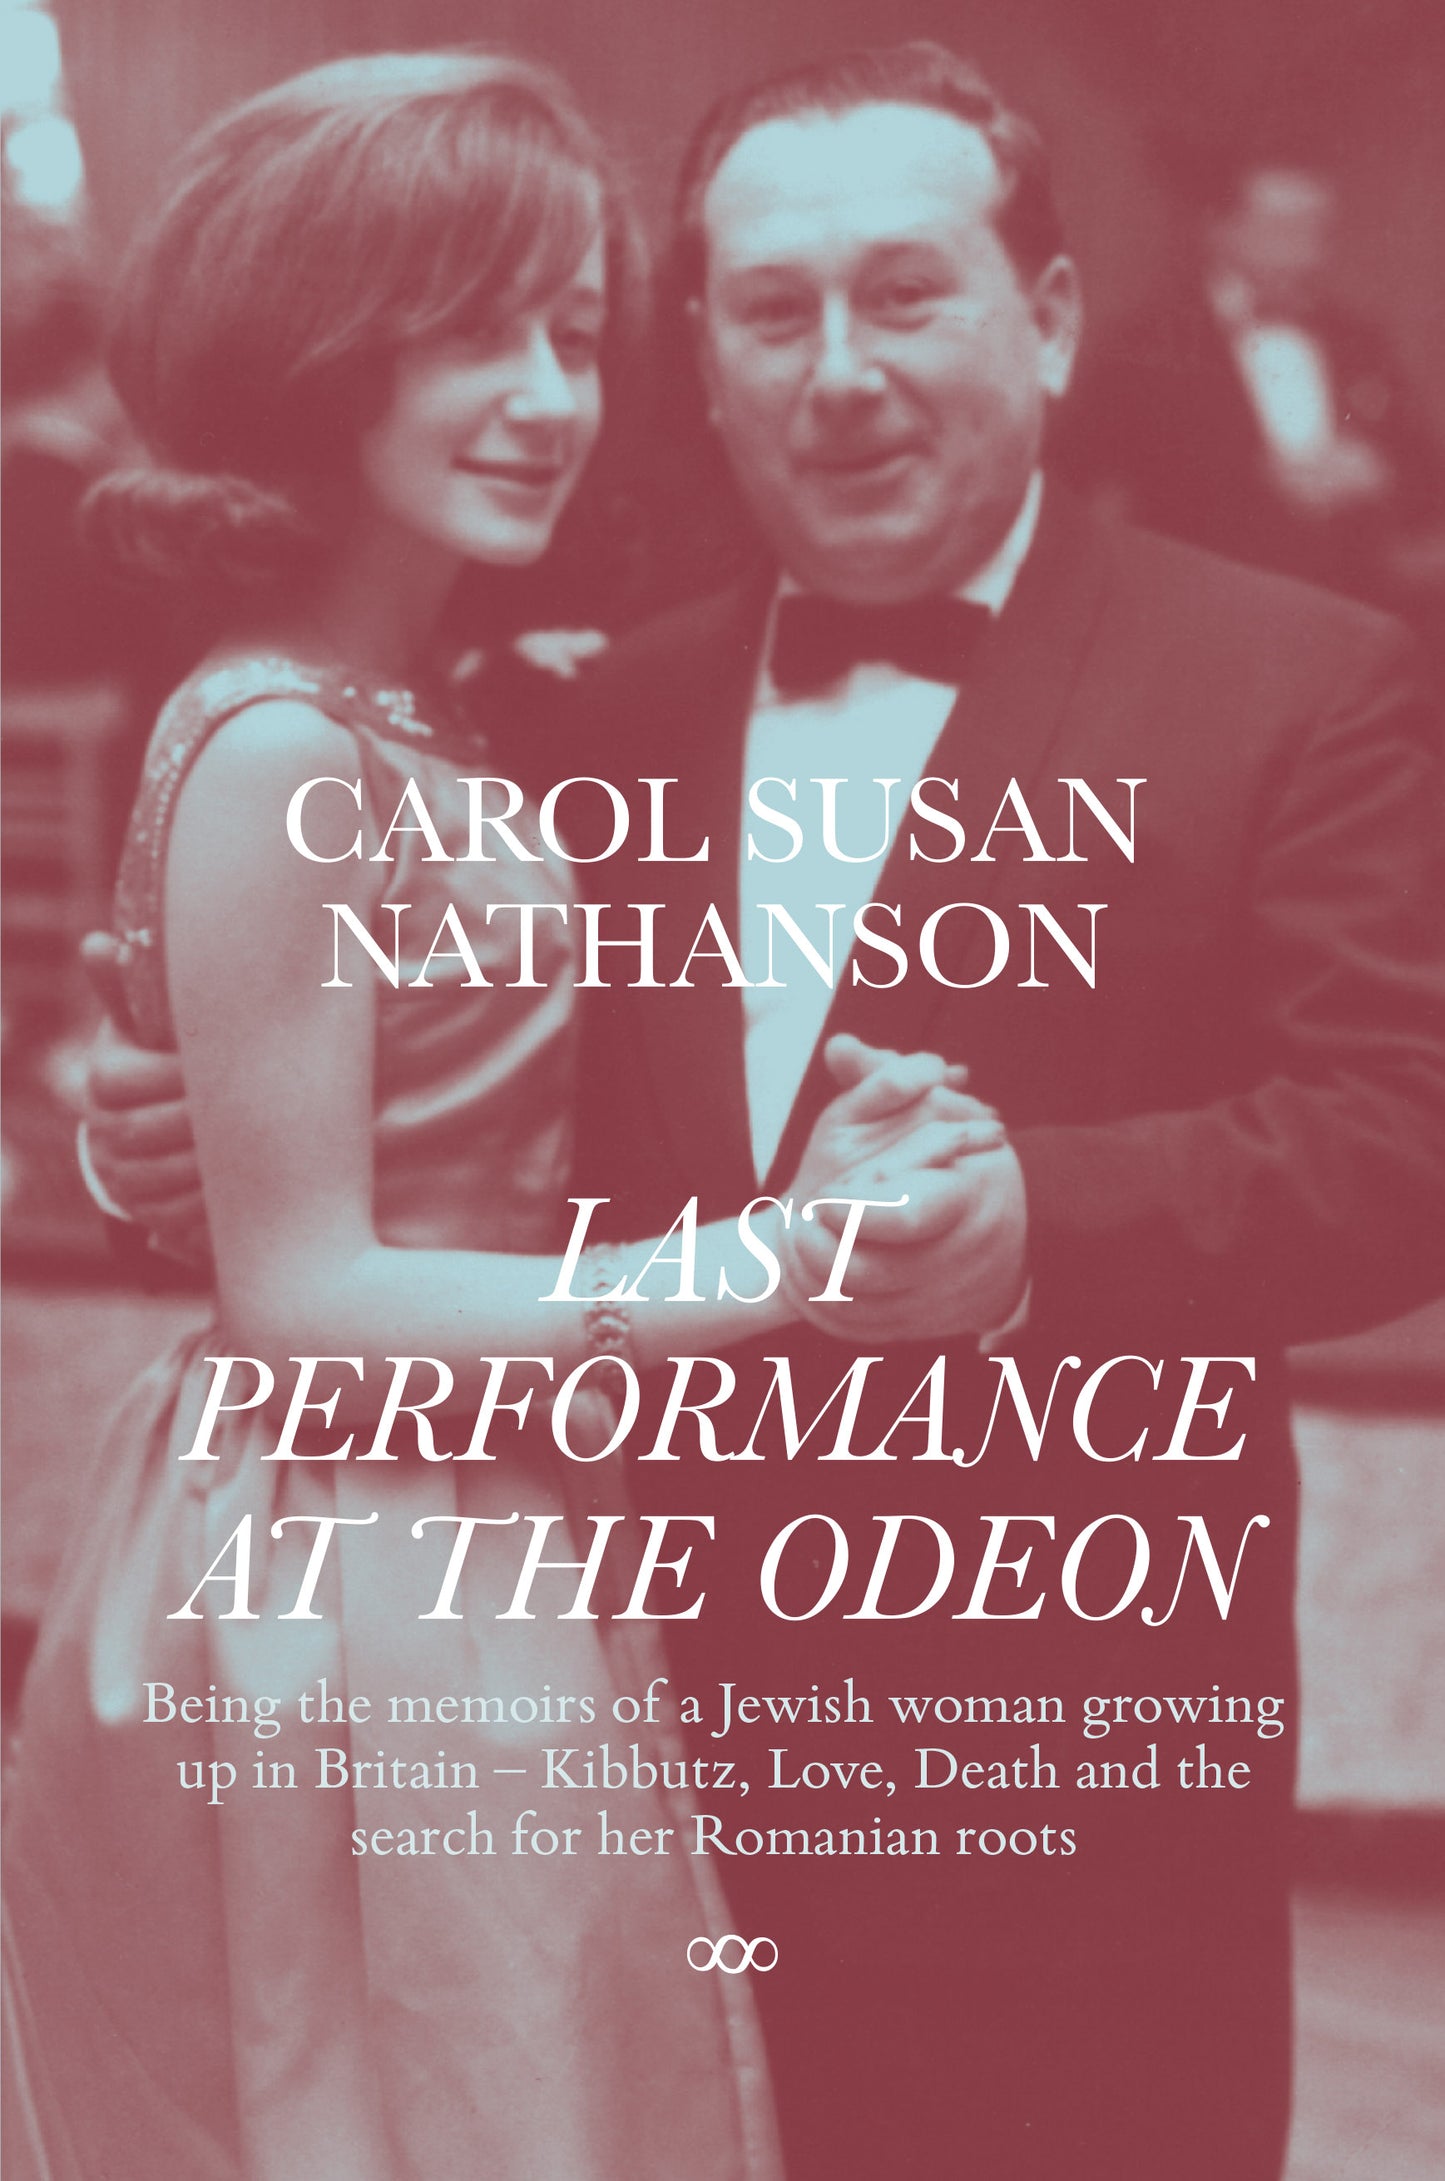 LAST PERFORMANCE AT THE ODEON Being the memoirs of a Jewish woman growing up in Britain – Kibbutz, Love, Death and the search for her Romanian roots